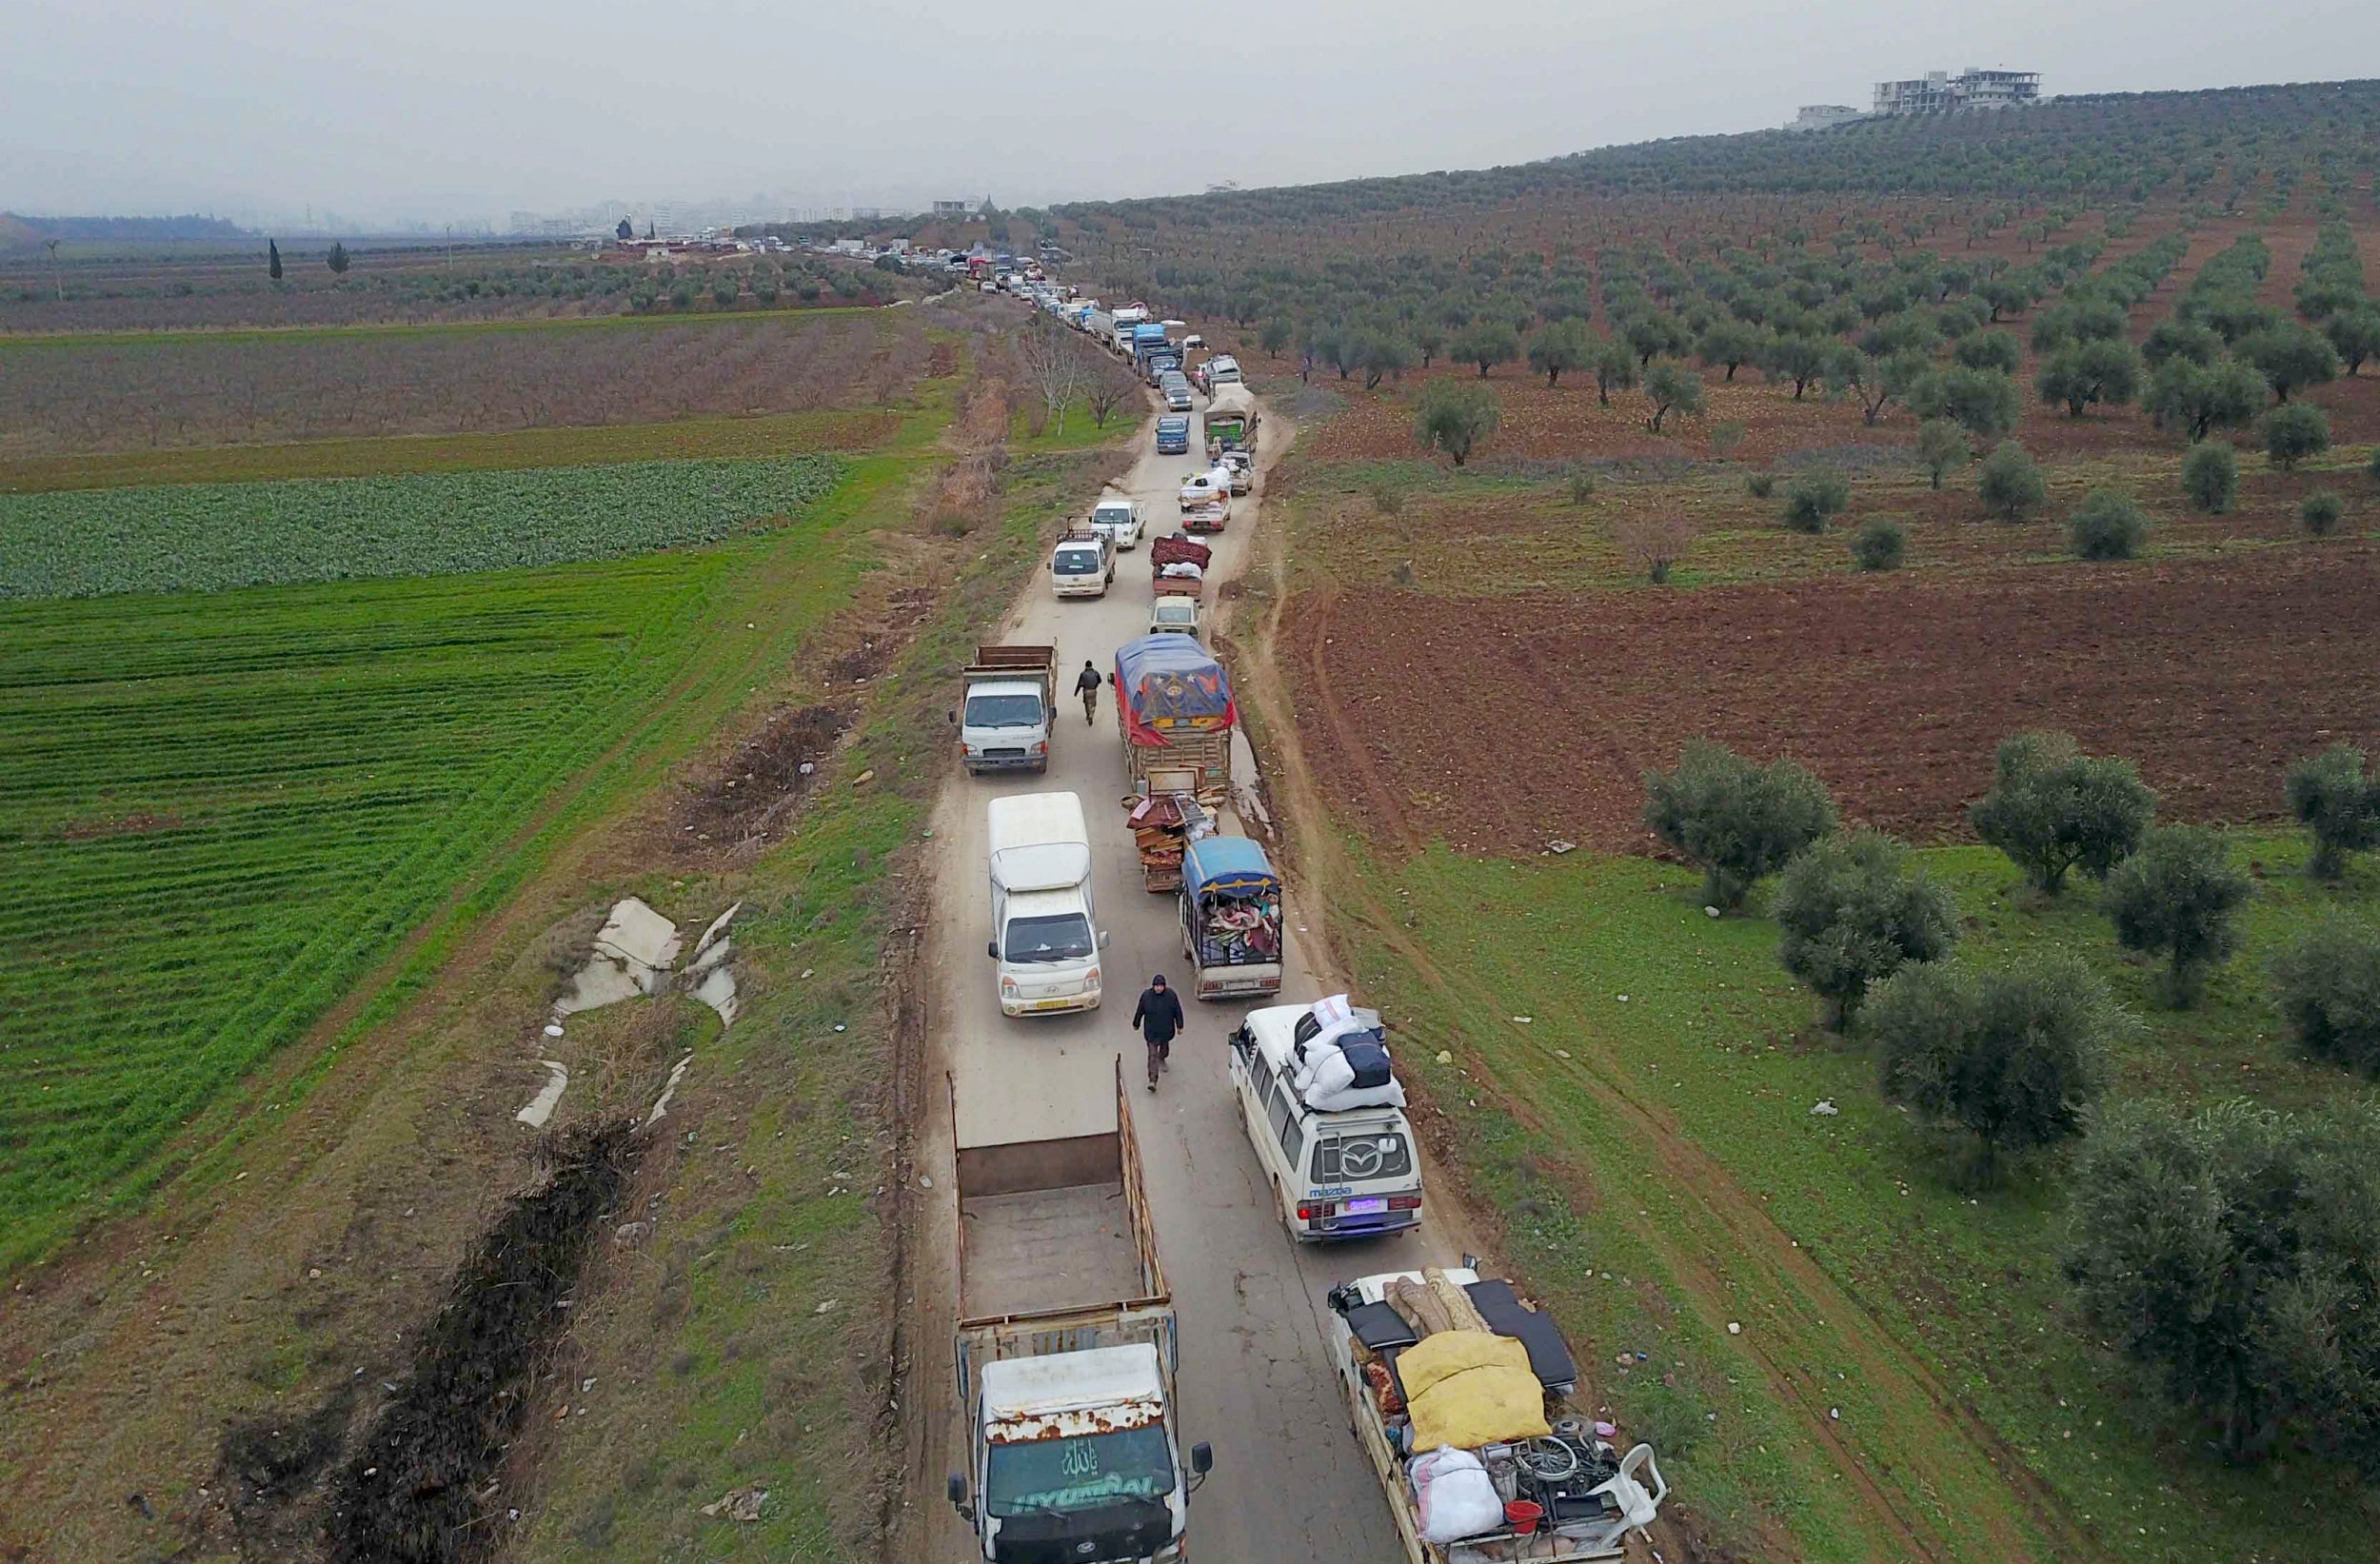 Civilians flee from Idlib to find safety inside Syria near the border with Turkey, 11 February 2020